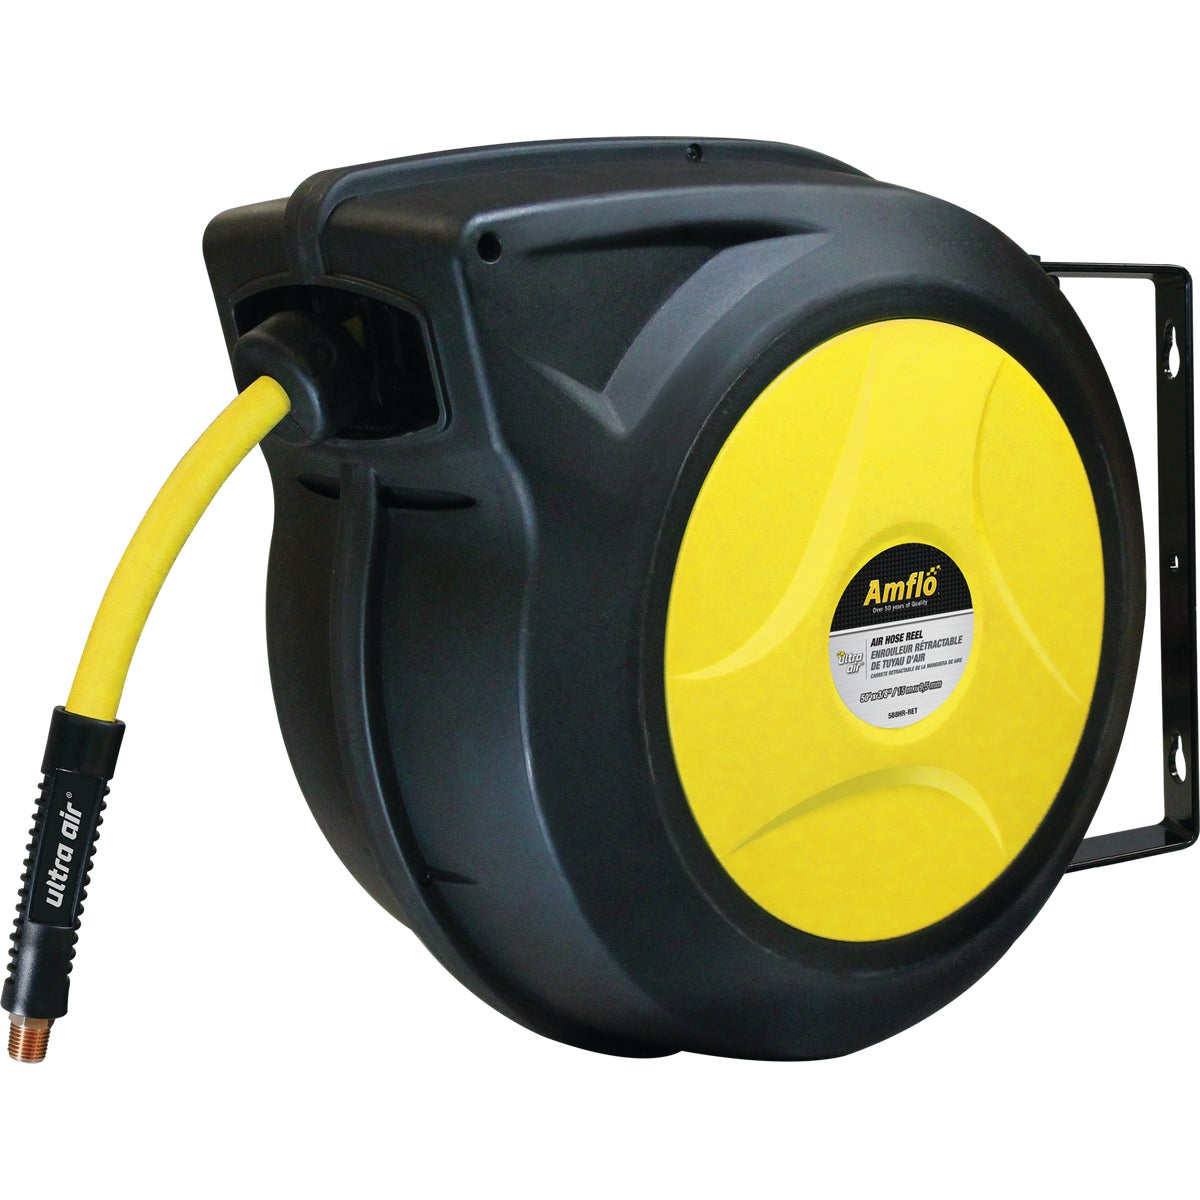 Item 570561, Enclosed air hose reel features impact resistant housing and guided returns